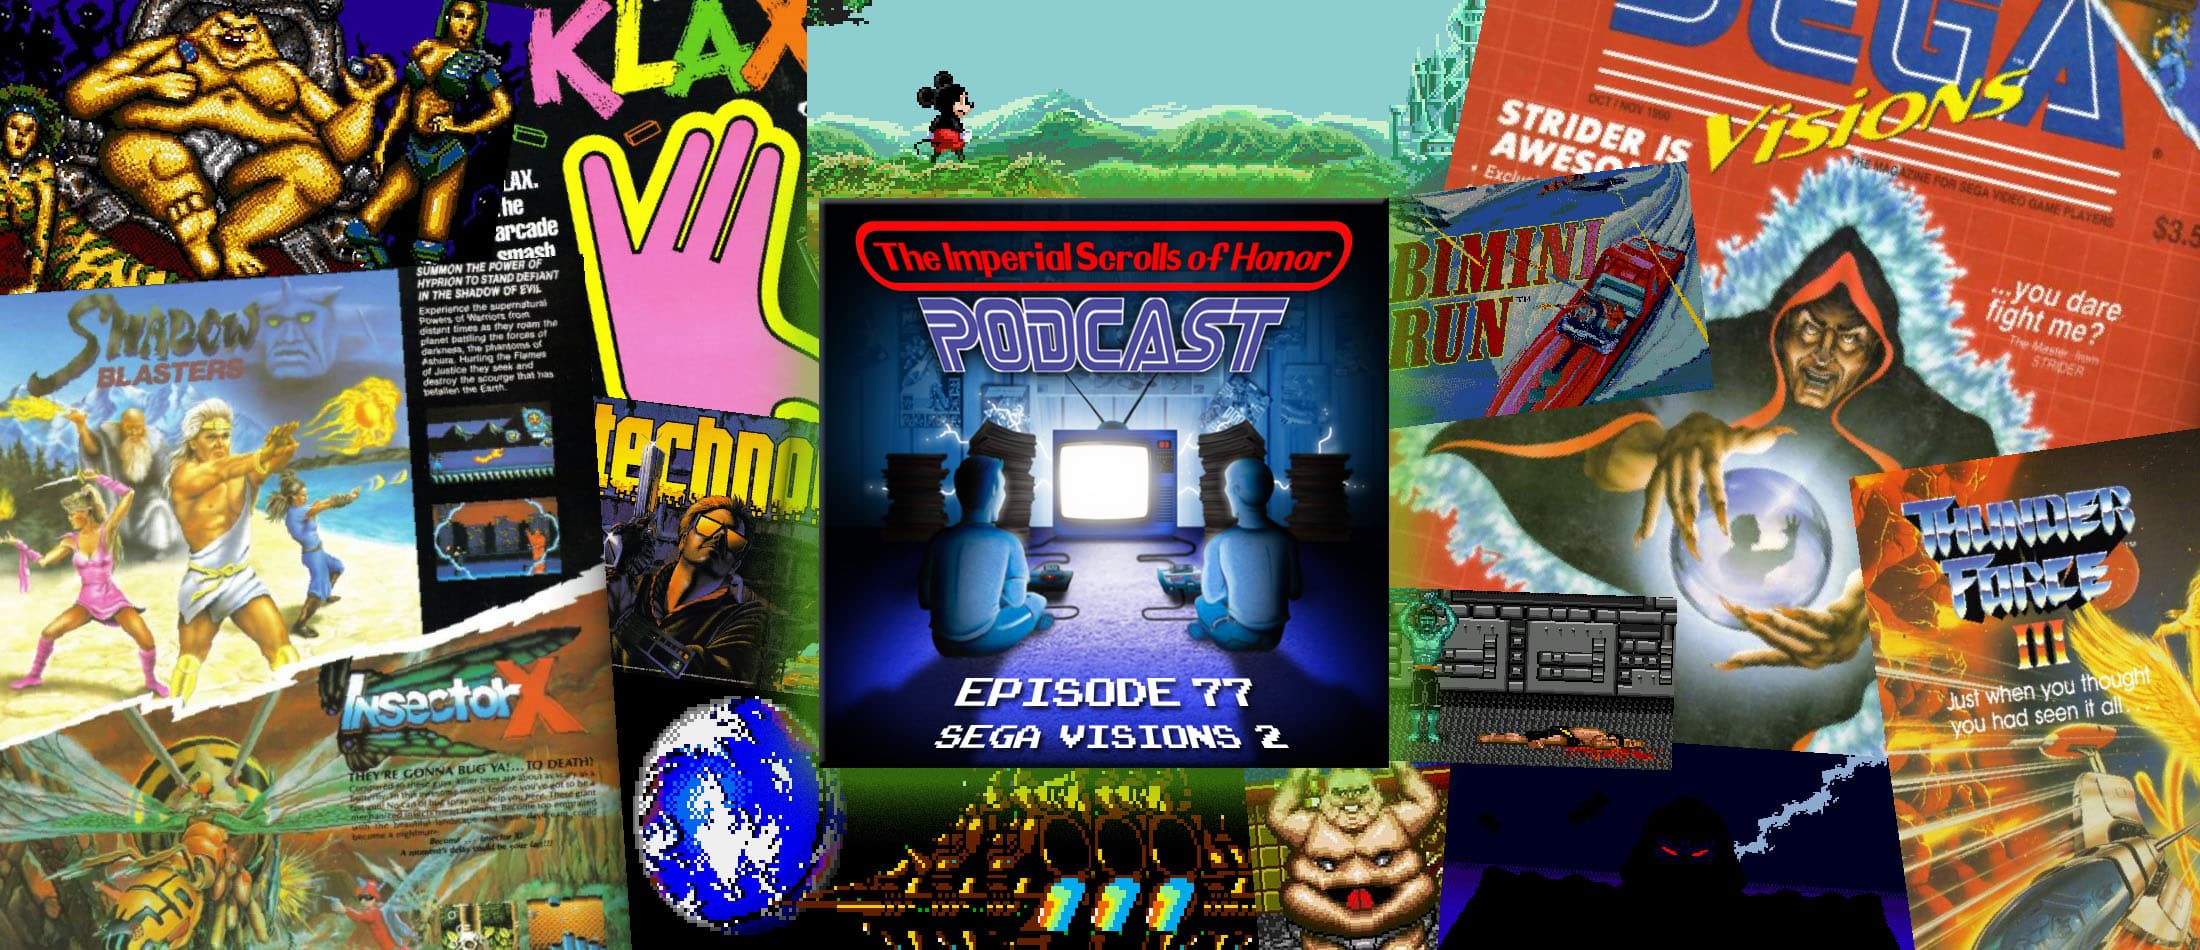 The Imperial Scrolls of Honor Podcast - Ep 77 - Sega Visions #2